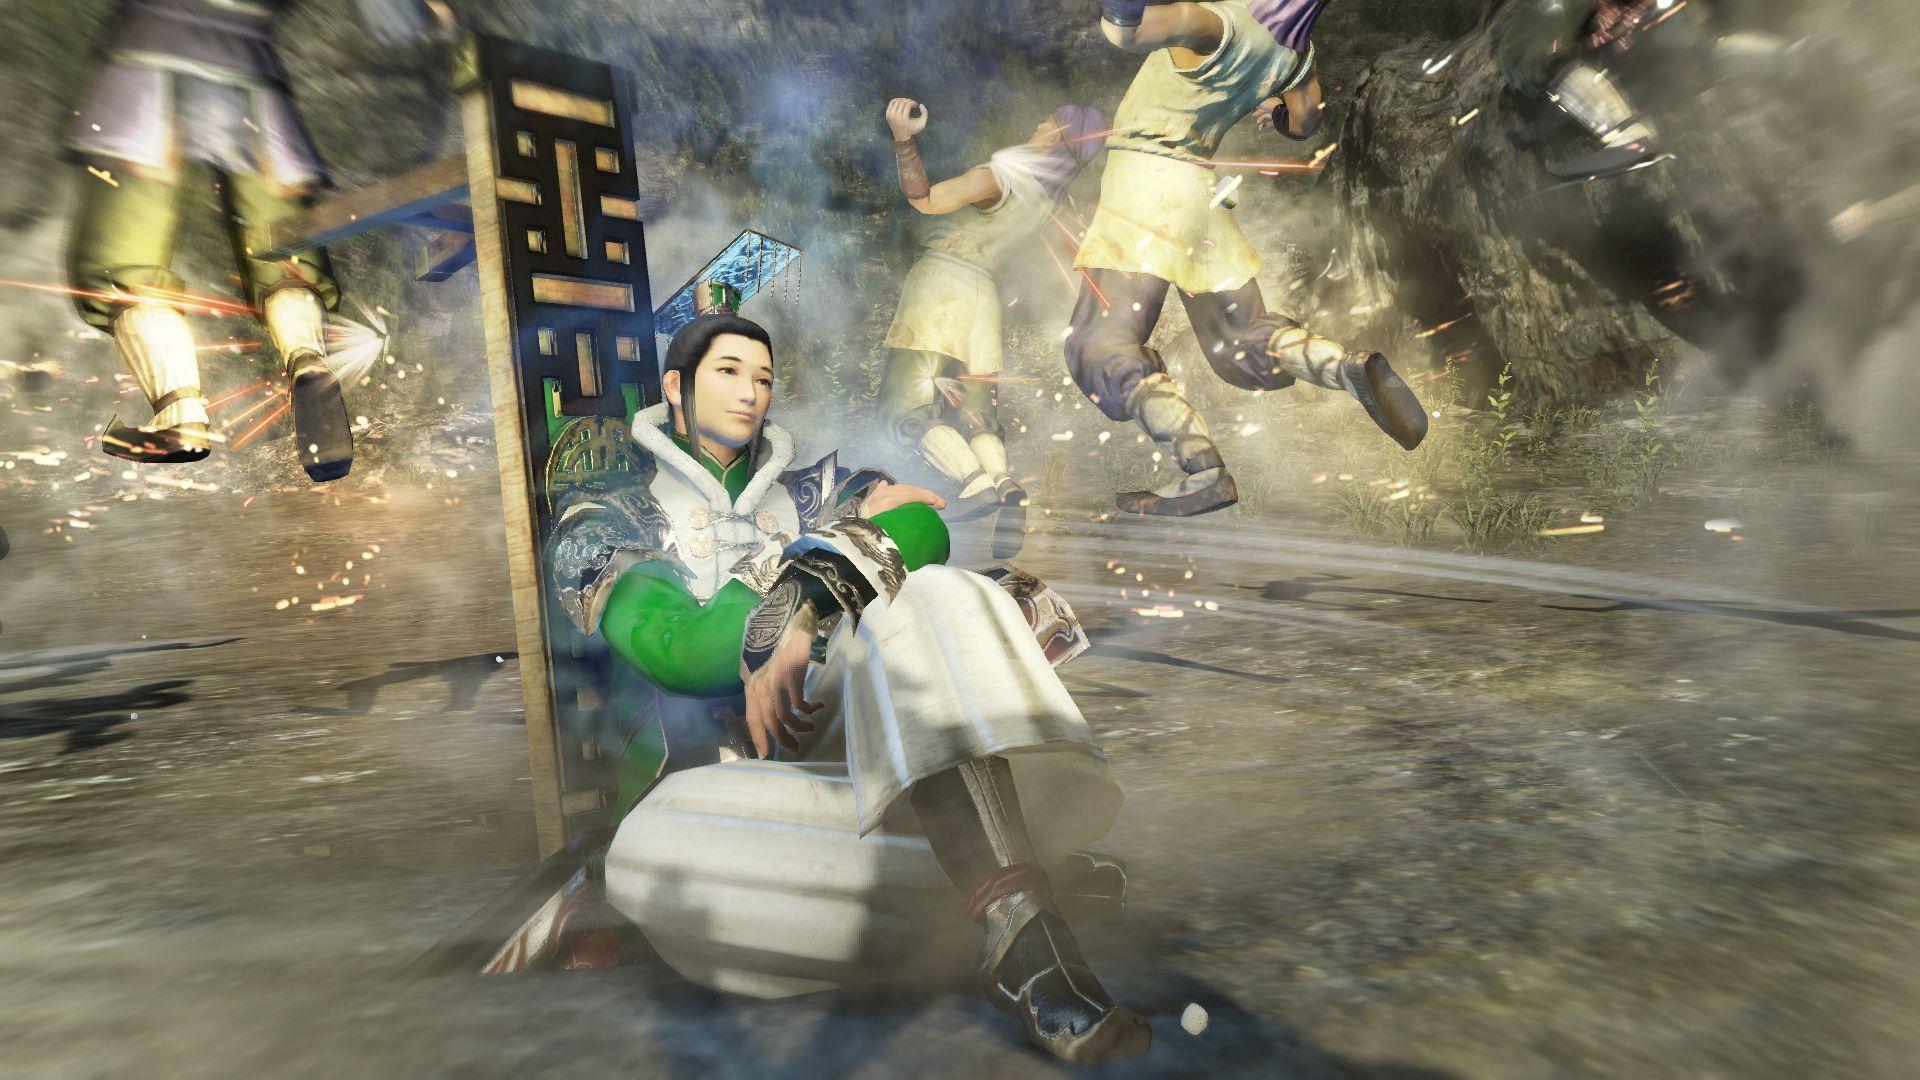 New Dynasty Warriors 8 Empires Screenshots and Concept Art Released